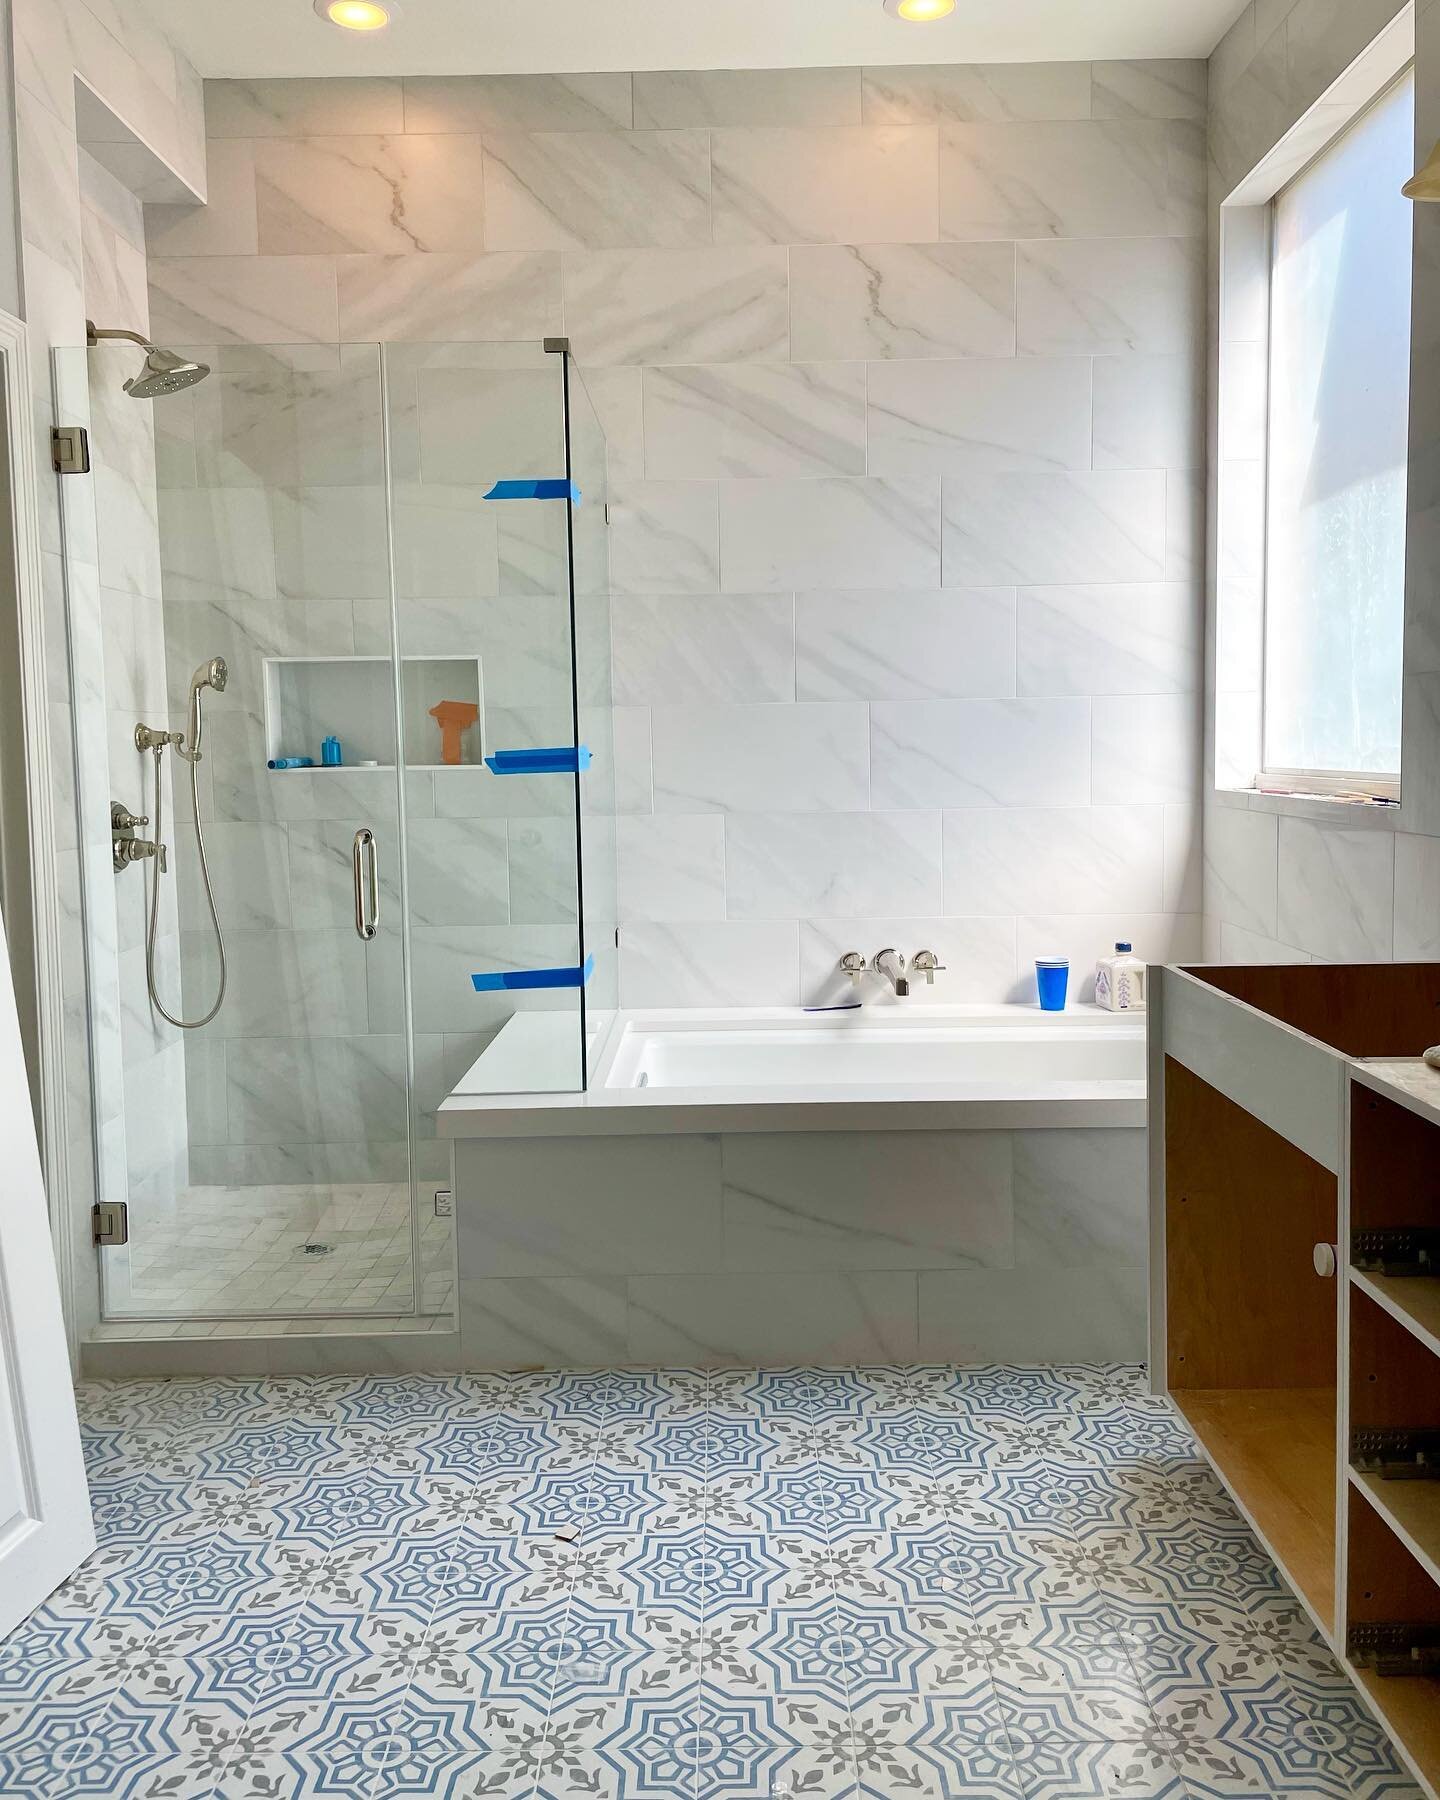 Hiring a good designer is the fastest, most direct path to remodel success.

I&rsquo;m so proud of this bathroom 💙 This shows the progression from start to (almost) finish. 

By my second meeting, I knew which direction to take the bathroom concept.